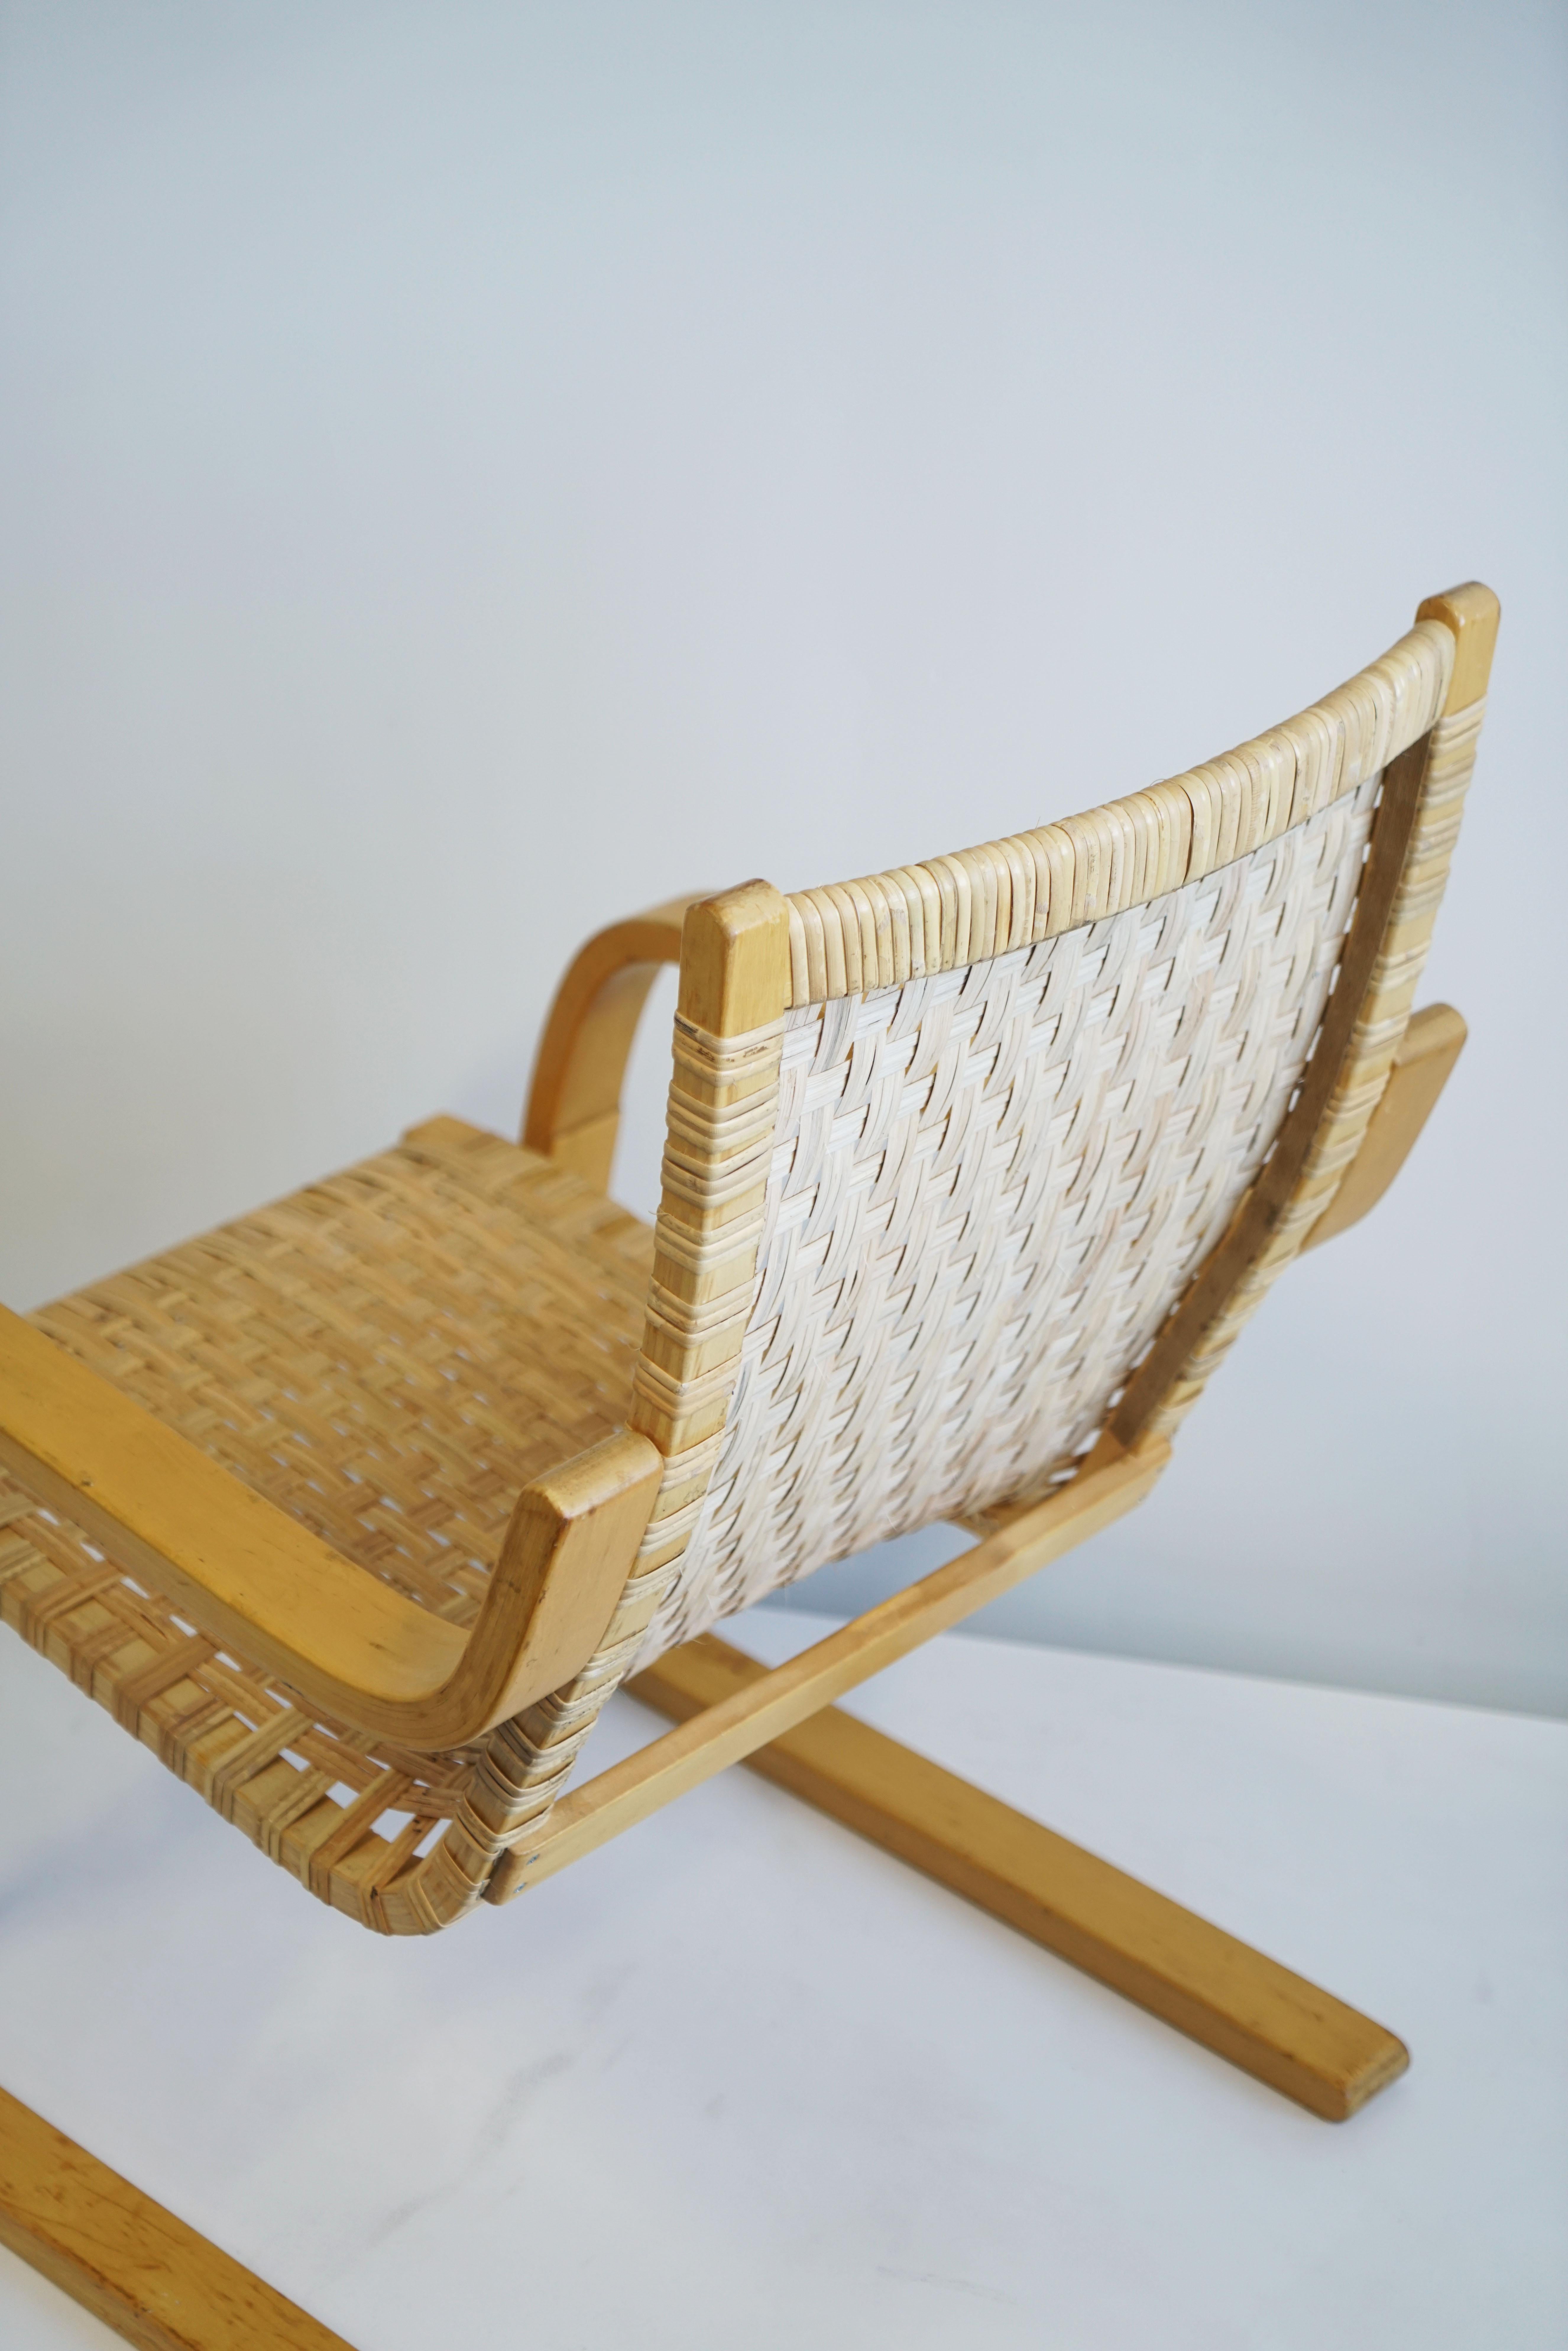 1960 Alvar Aalto Cantilever Chair Model 406 by Artek in Birch and Cane Webbing For Sale 5